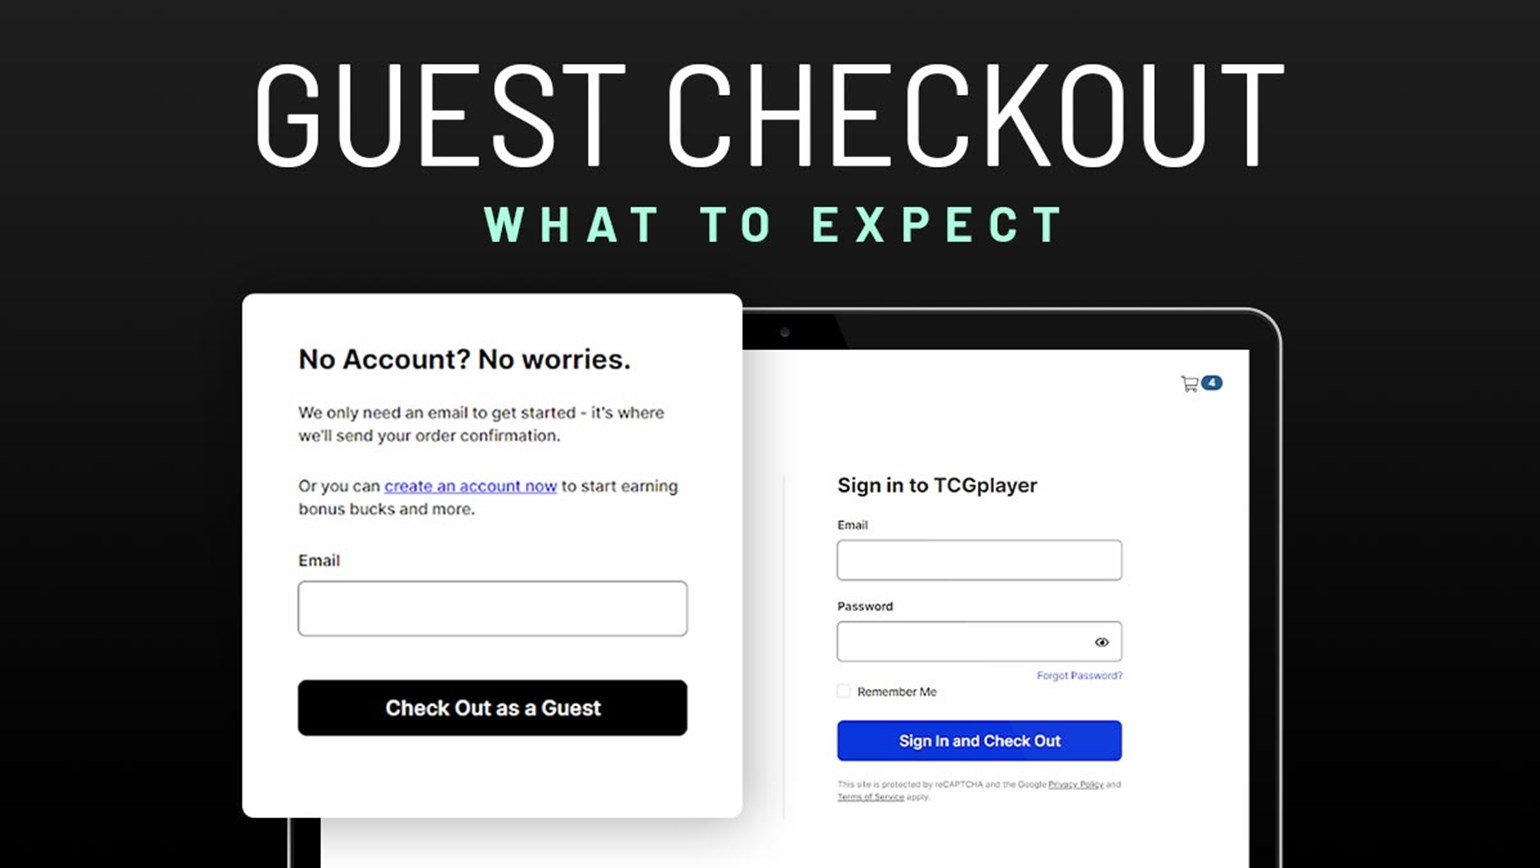 Guest Checkout: What To Expect